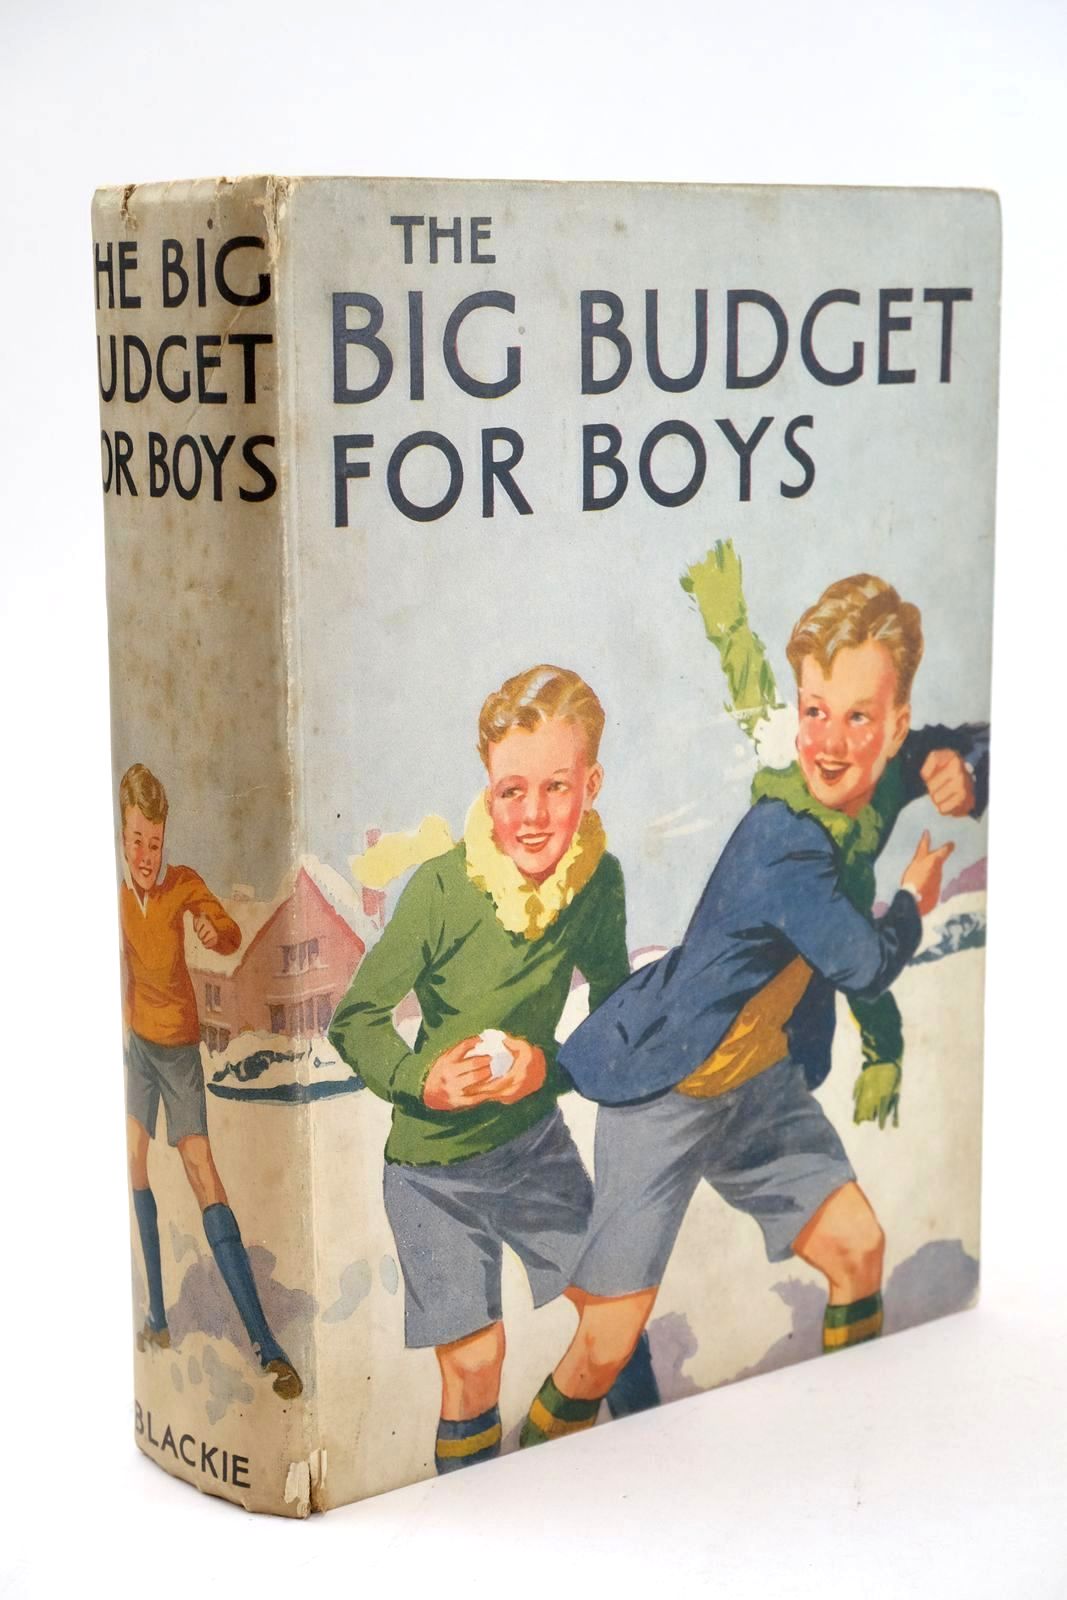 Photo of THE BIG BUDGET FOR BOYS written by Westerman, Percy F.
Havilton, Jeffrey
Lucas, S. Beresford
et al,  illustrated by Mays, D.L.
Lumley, Savile
Silas, Ellis
et al.,  published by Blackie & Son Ltd. (STOCK CODE: 1325131)  for sale by Stella & Rose's Books